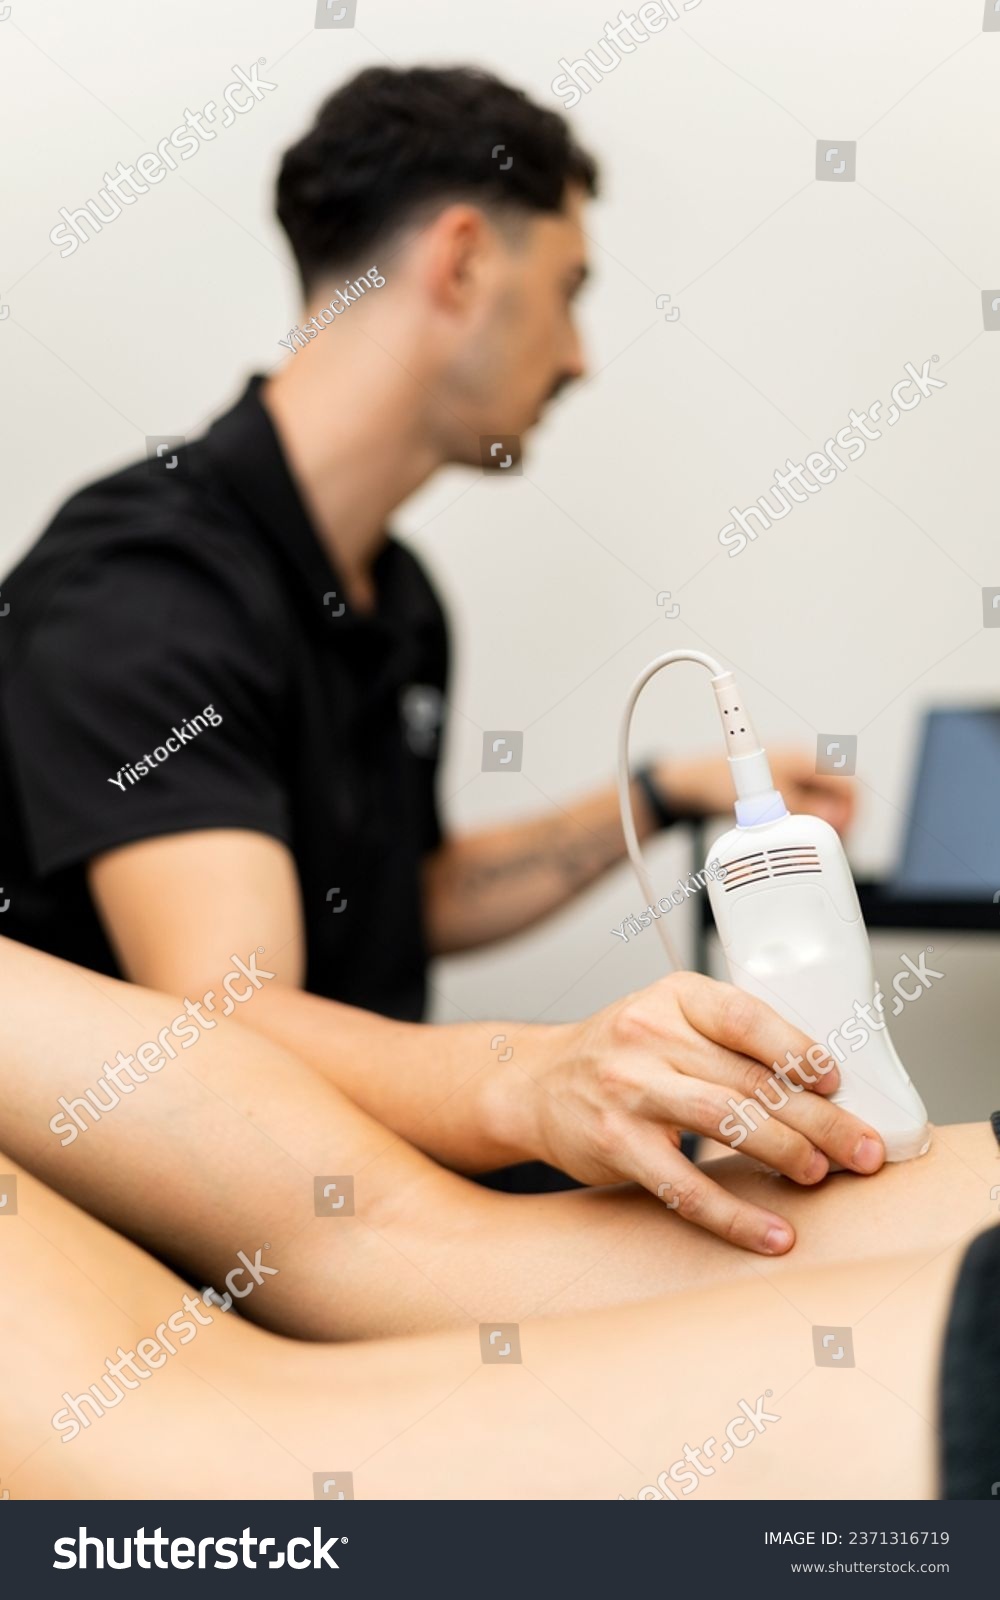 A male physical therapist is performing an ultrasound on a patient's femoral to detect pain. The probe in the client's leg is in the foreground. Concept of ultrasound in physiotherapy clinics. #2371316719